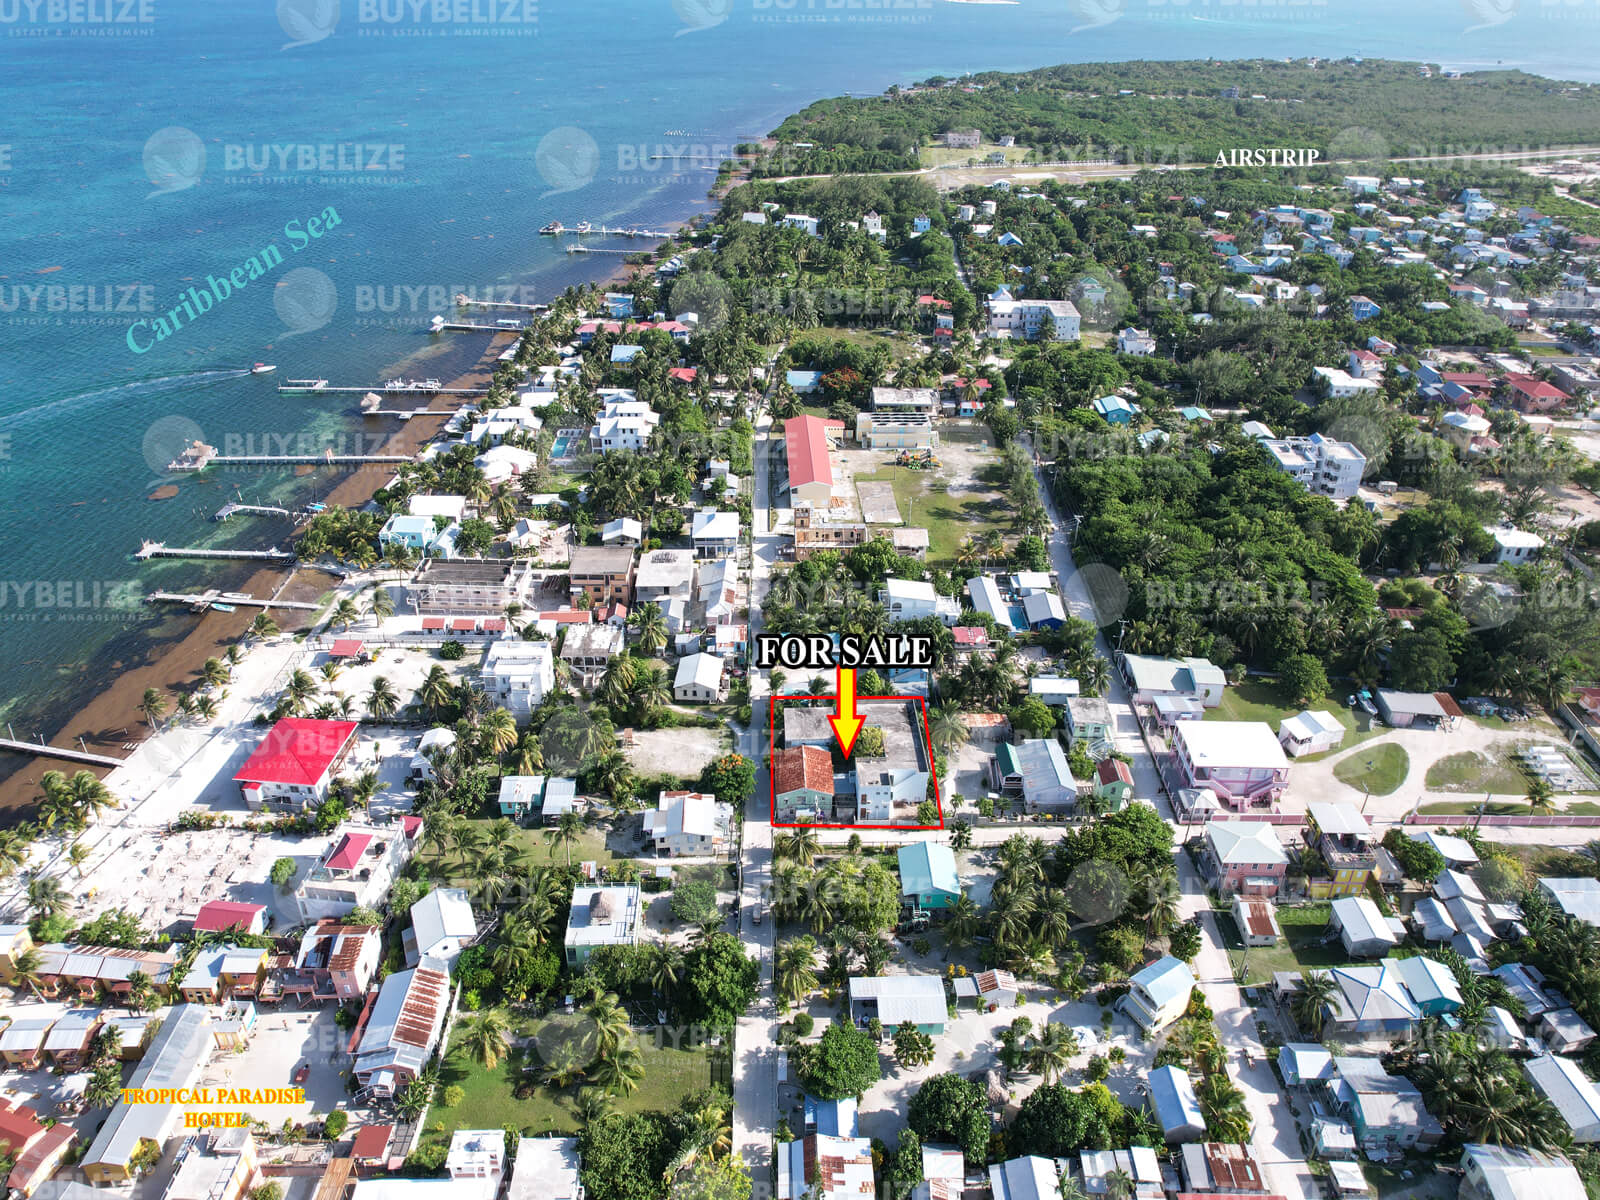 Large Commercial Island Property for Sale in Caye Caulker